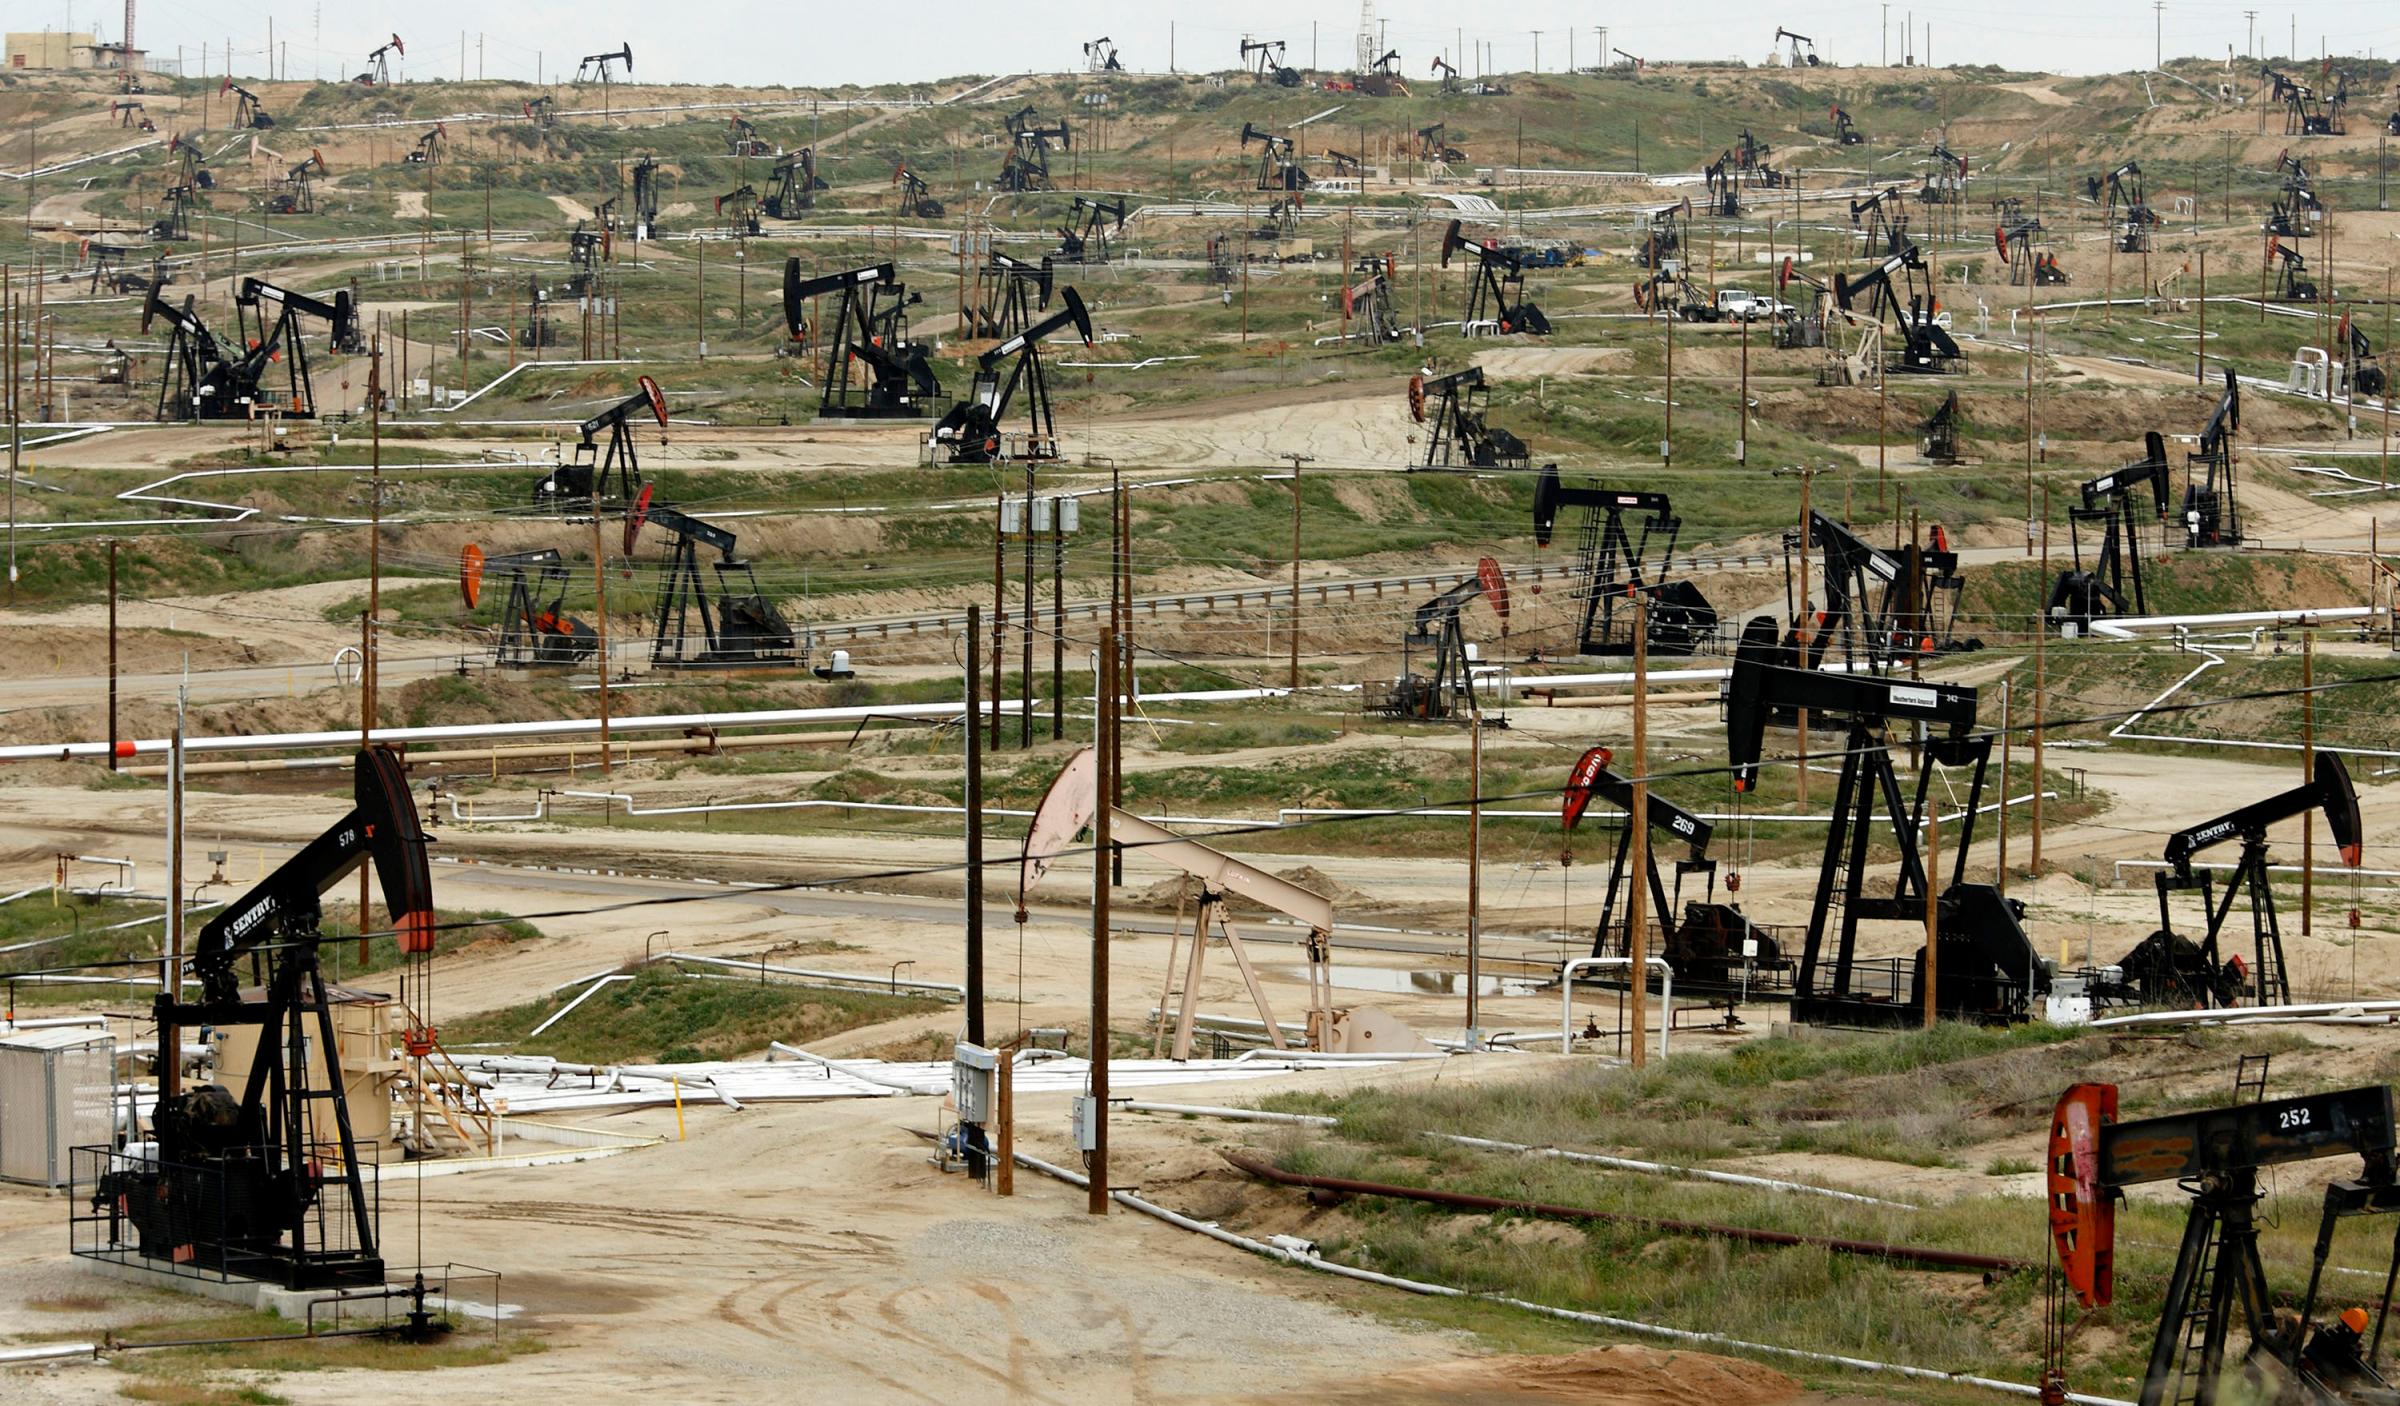 Oil pumps stand at the Chevron Corp. Kern River oil field in Bakersfield, Calif.